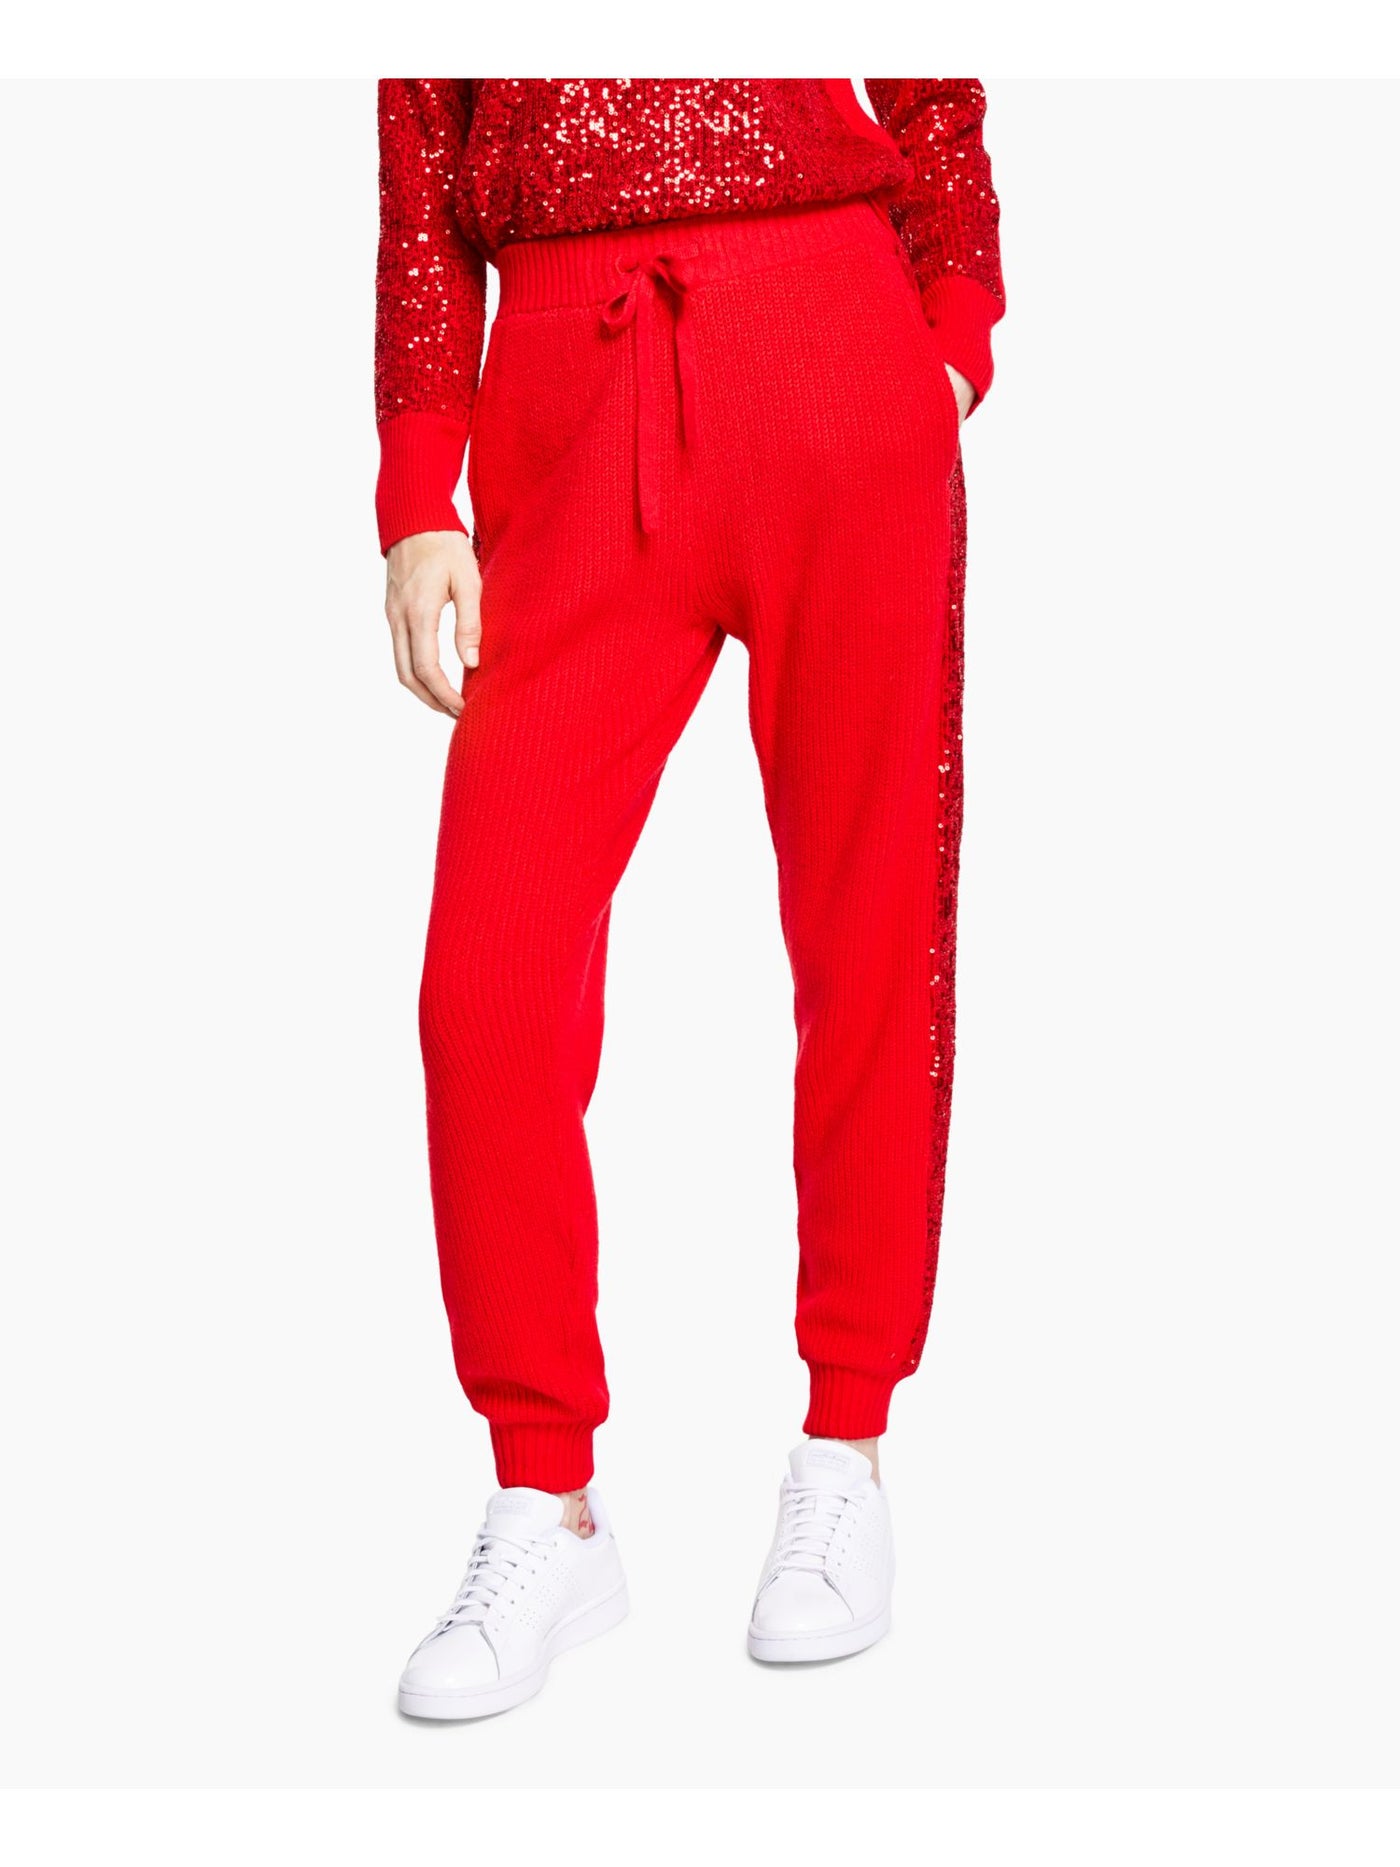 INC Womens Red Cotton Blend Pocketed Ribbed Elastic Drawstring Waist Joggers High Waist Pants Petites PP